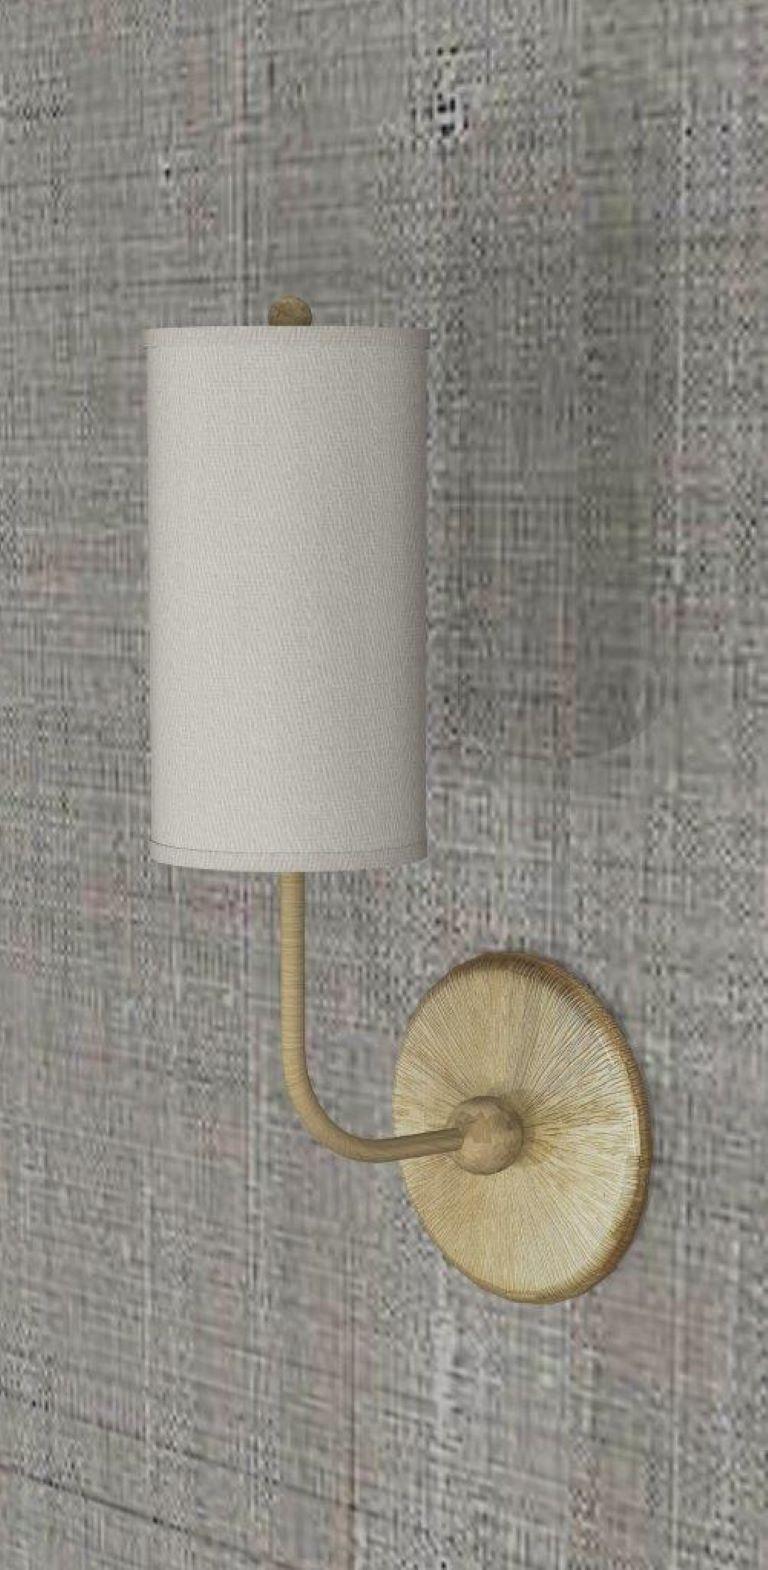 This wall light is a modern take on tradition. Beautifully crafted with elegant materials including brushed brass and sateen shades. The tall, timeless shades add a modern touch to the classic motif base, giving a familiar, yet forward looking